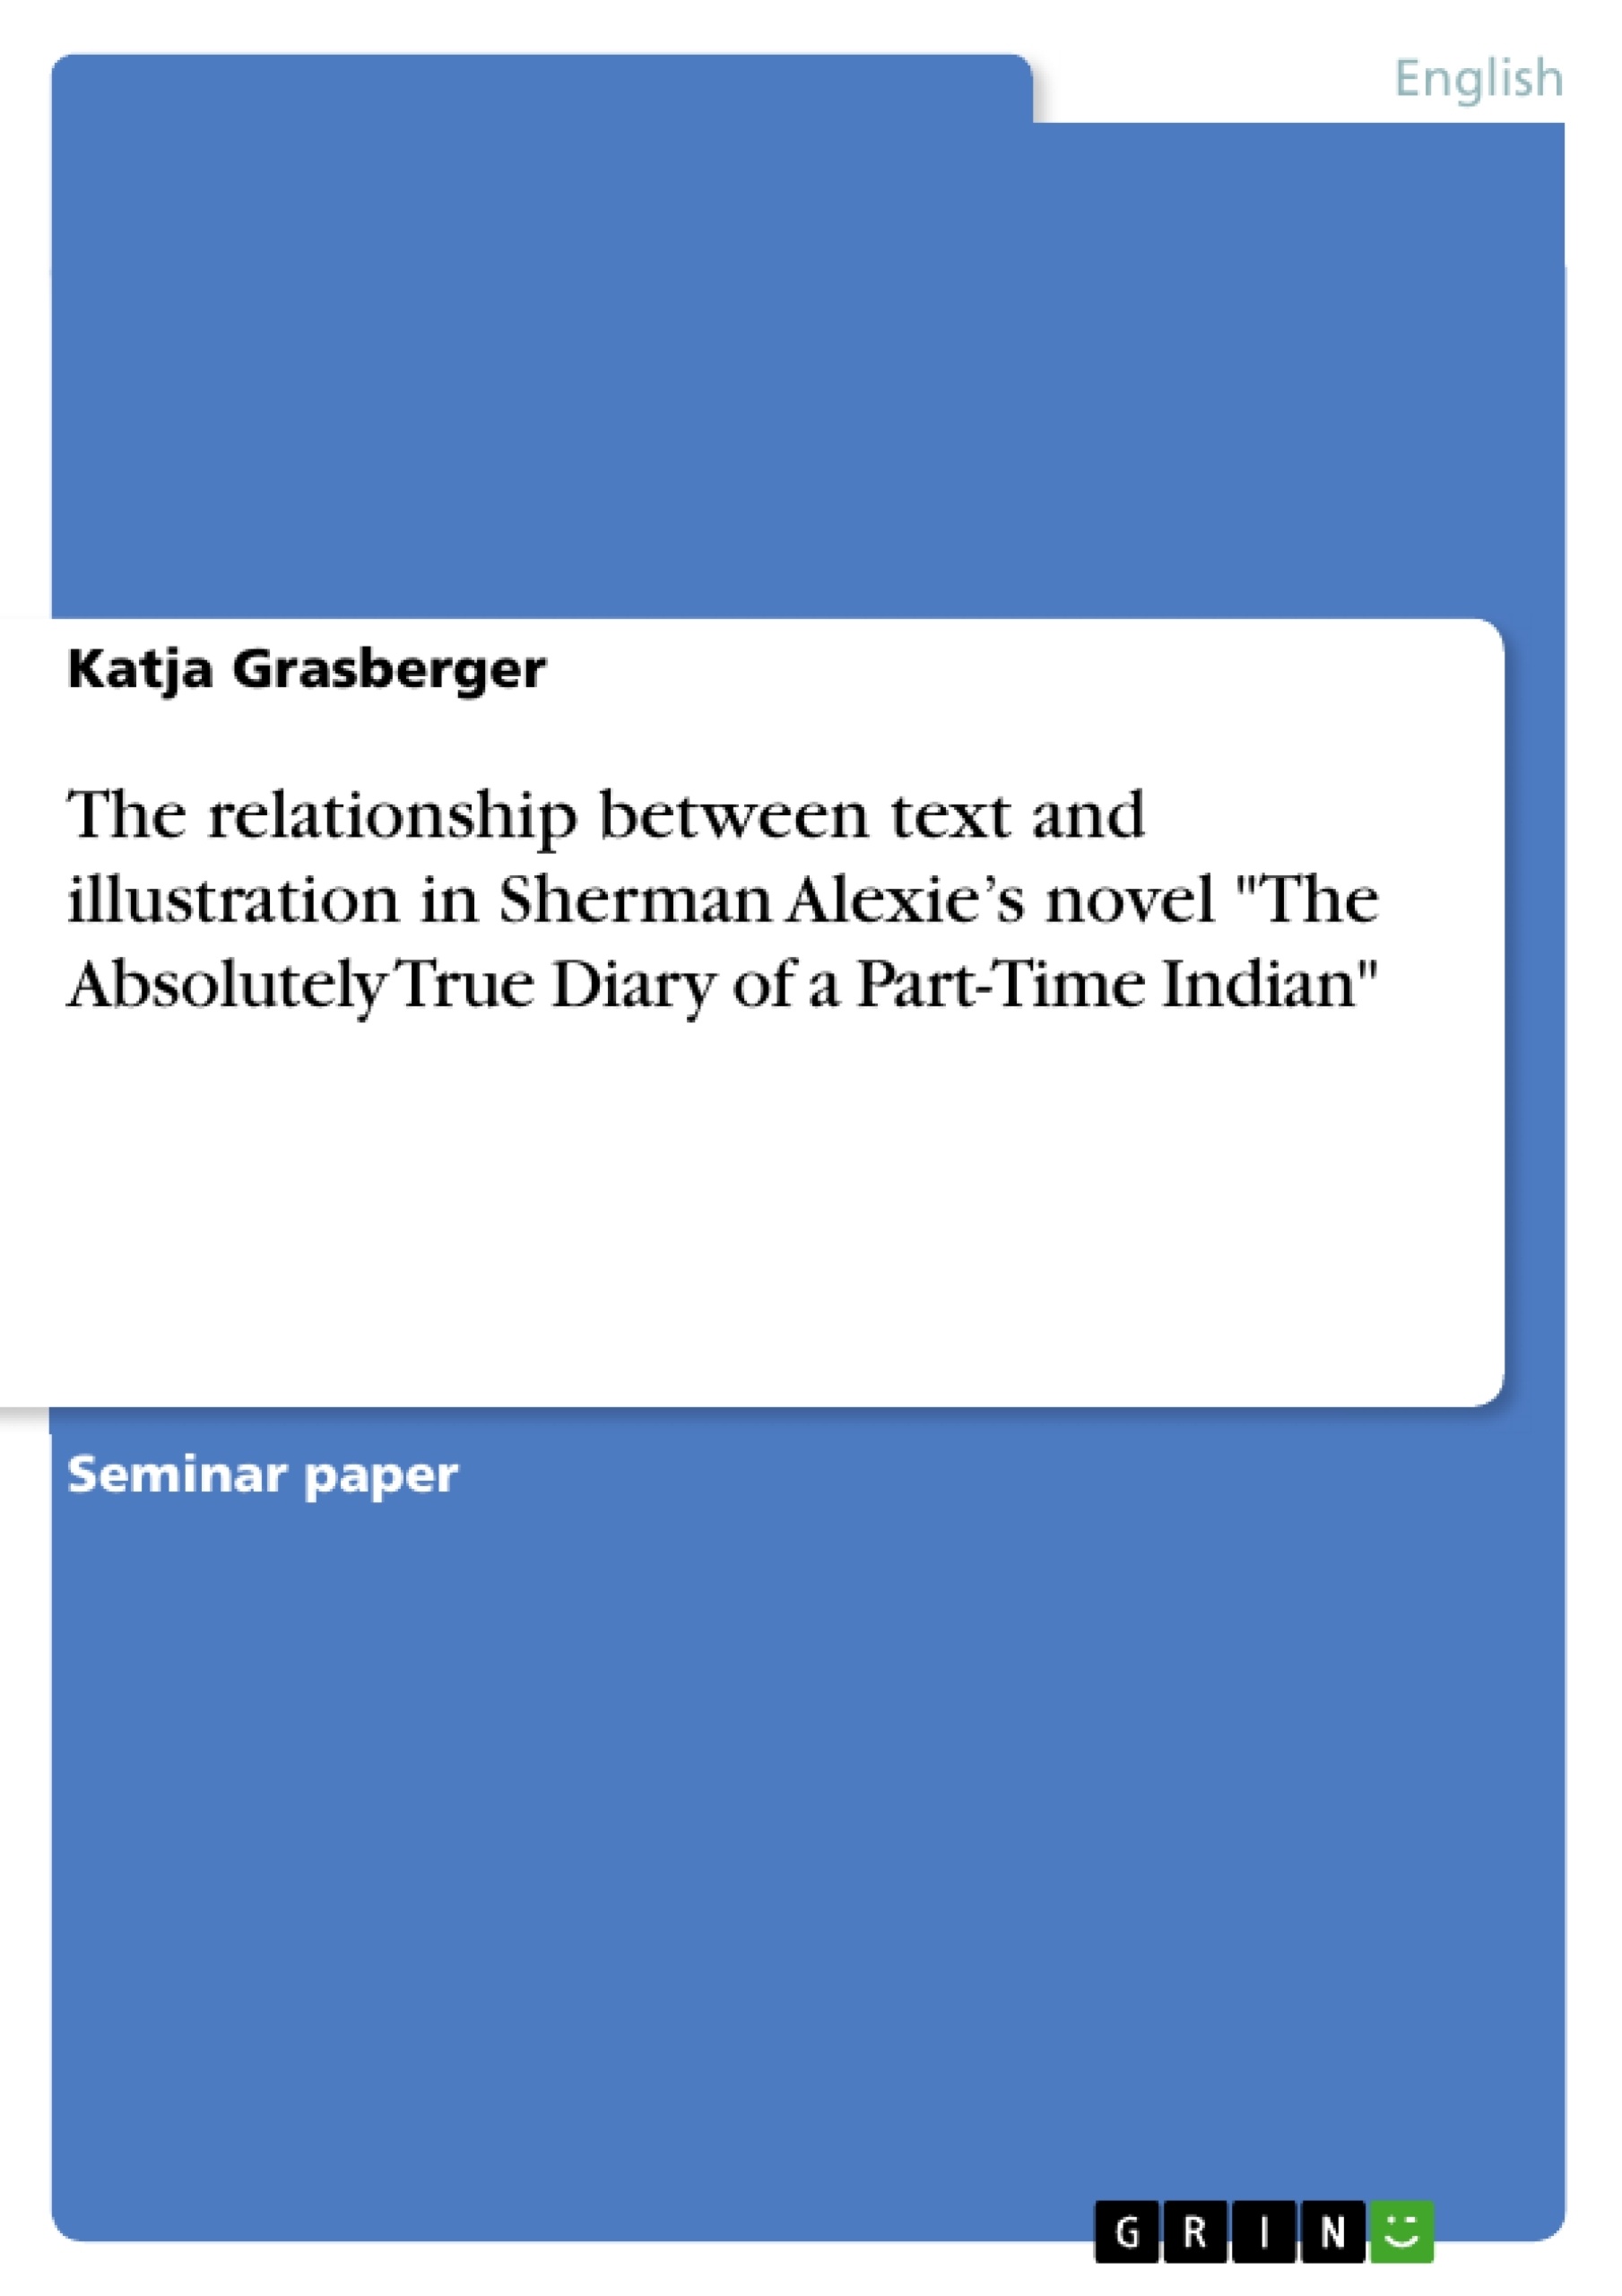 Título: The relationship between text and illustration in Sherman Alexie’s novel "The Absolutely True Diary of a Part-Time Indian"